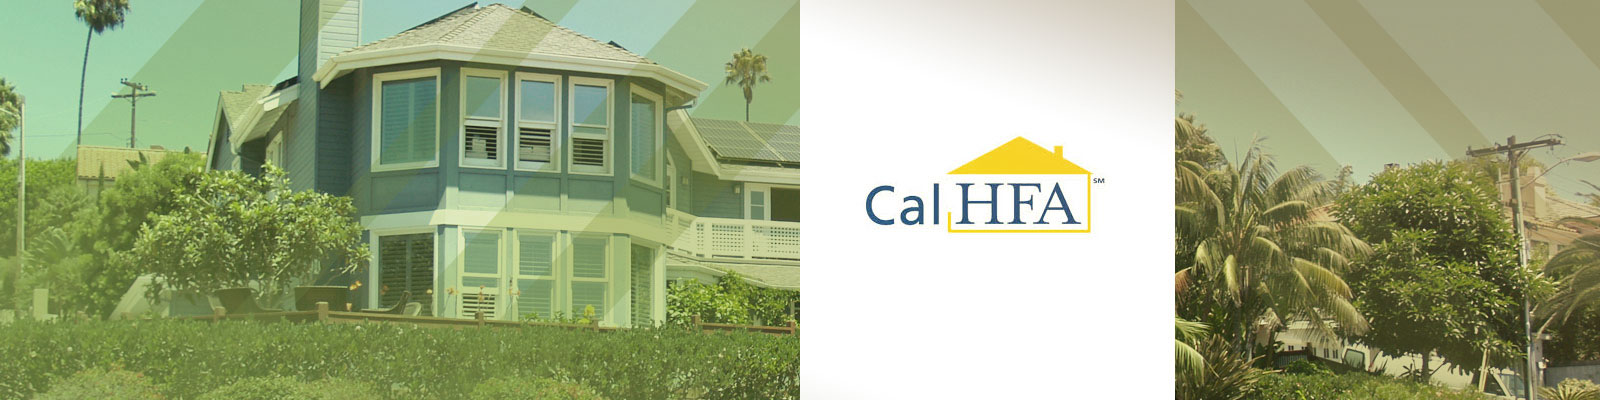 Down Payment Assistance - CalHFA Loan and Grant Programs